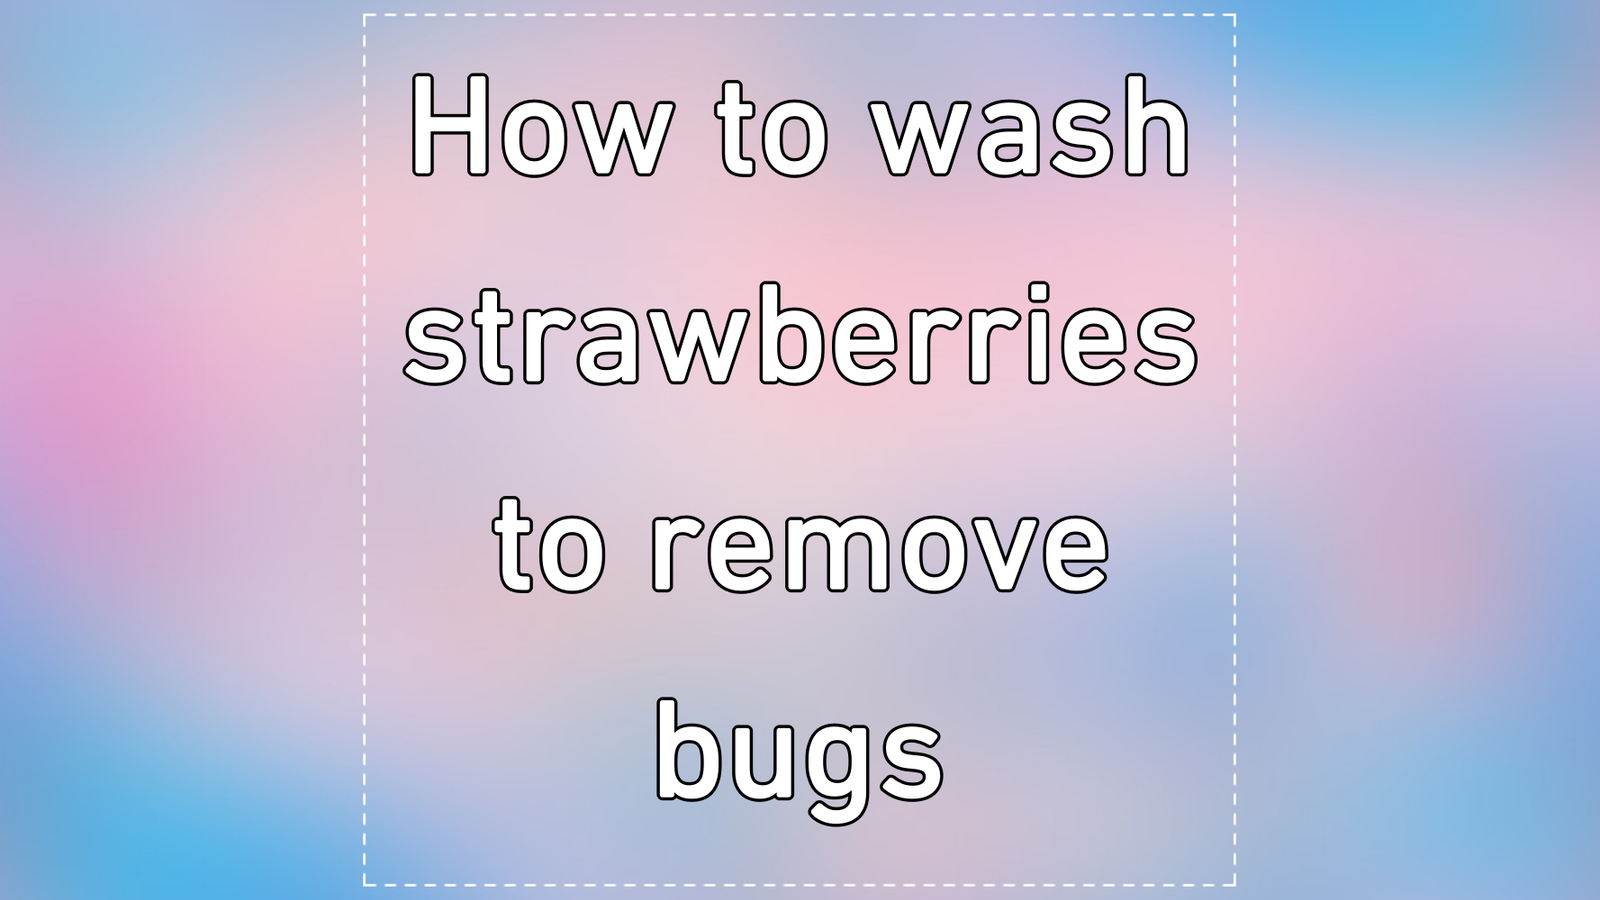 How to wash strawberries to remove bugs